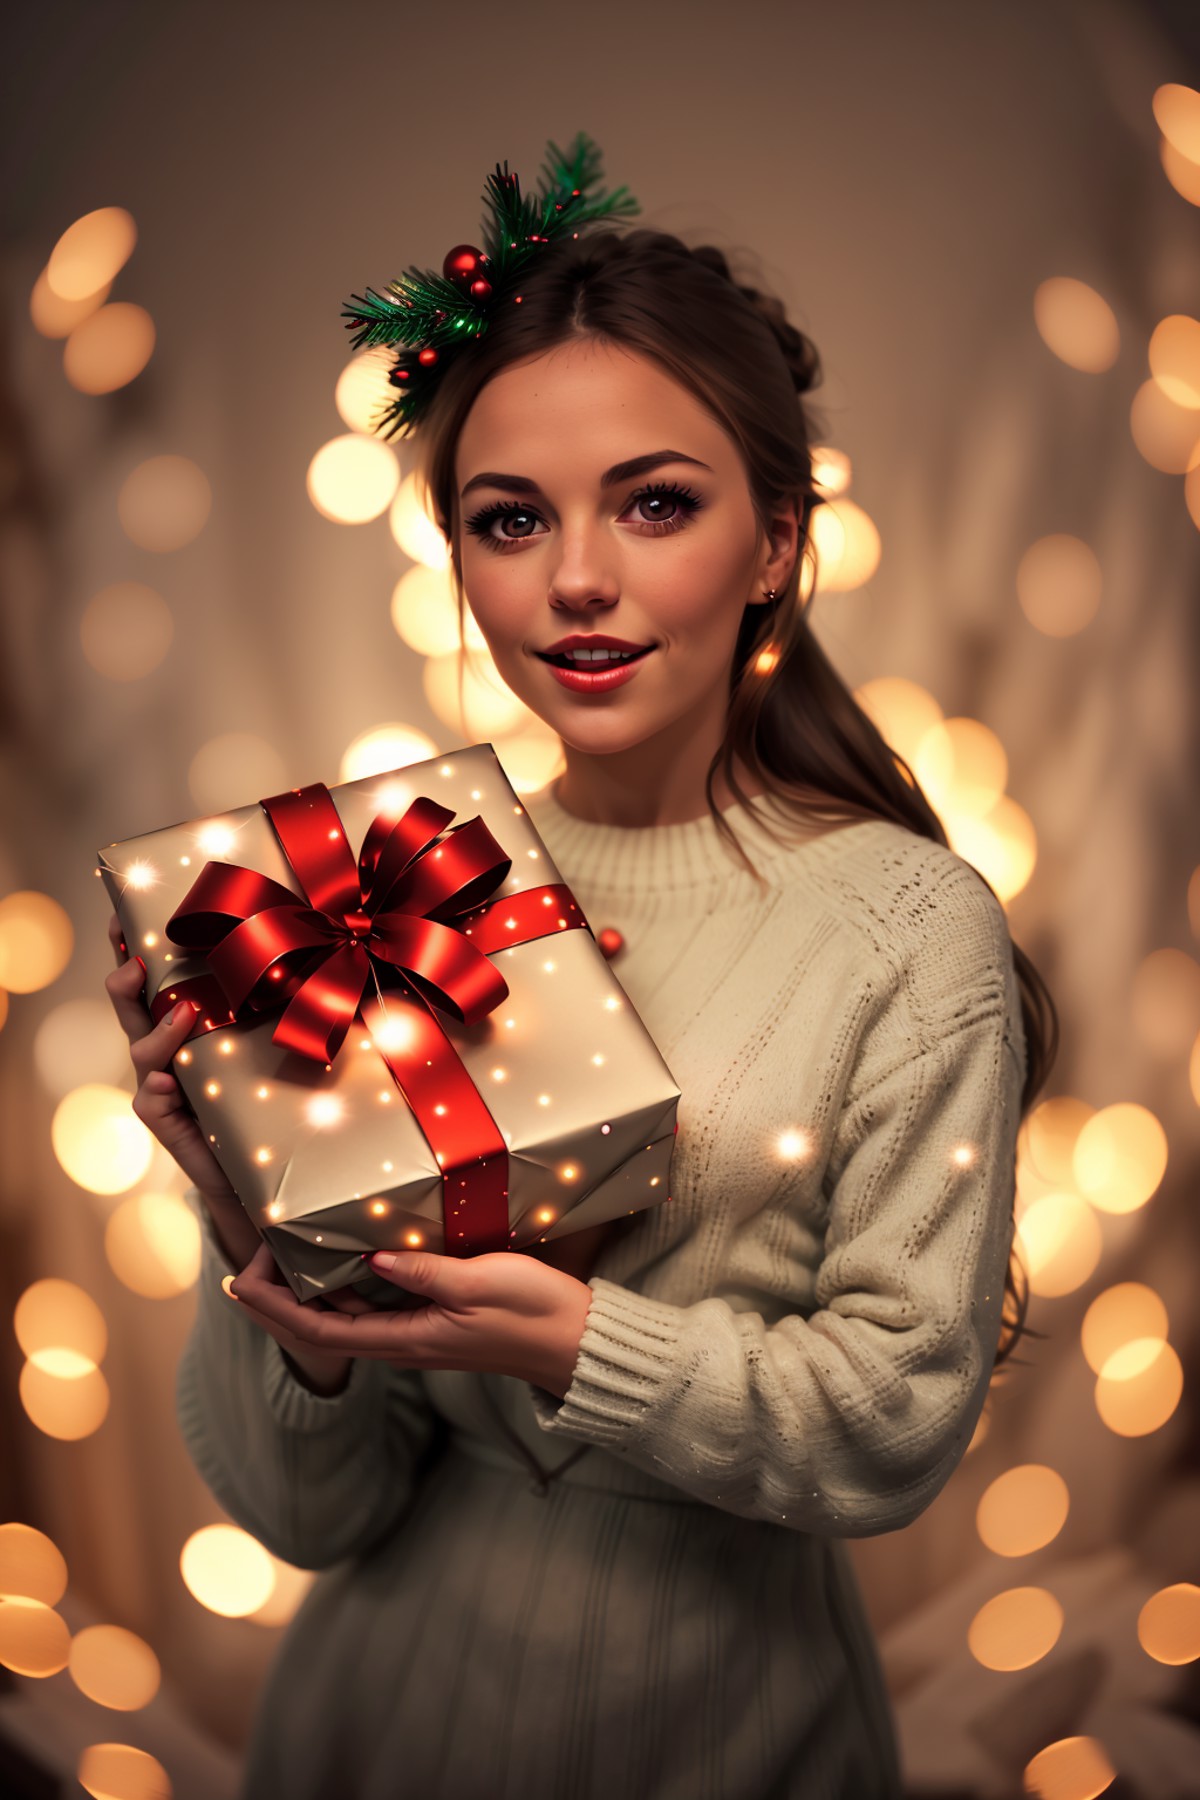 <lora:Xmas3:0.8> Xmas woman holding a neatly wrapped christmas gift, christmas style background, (string lights:0.4)